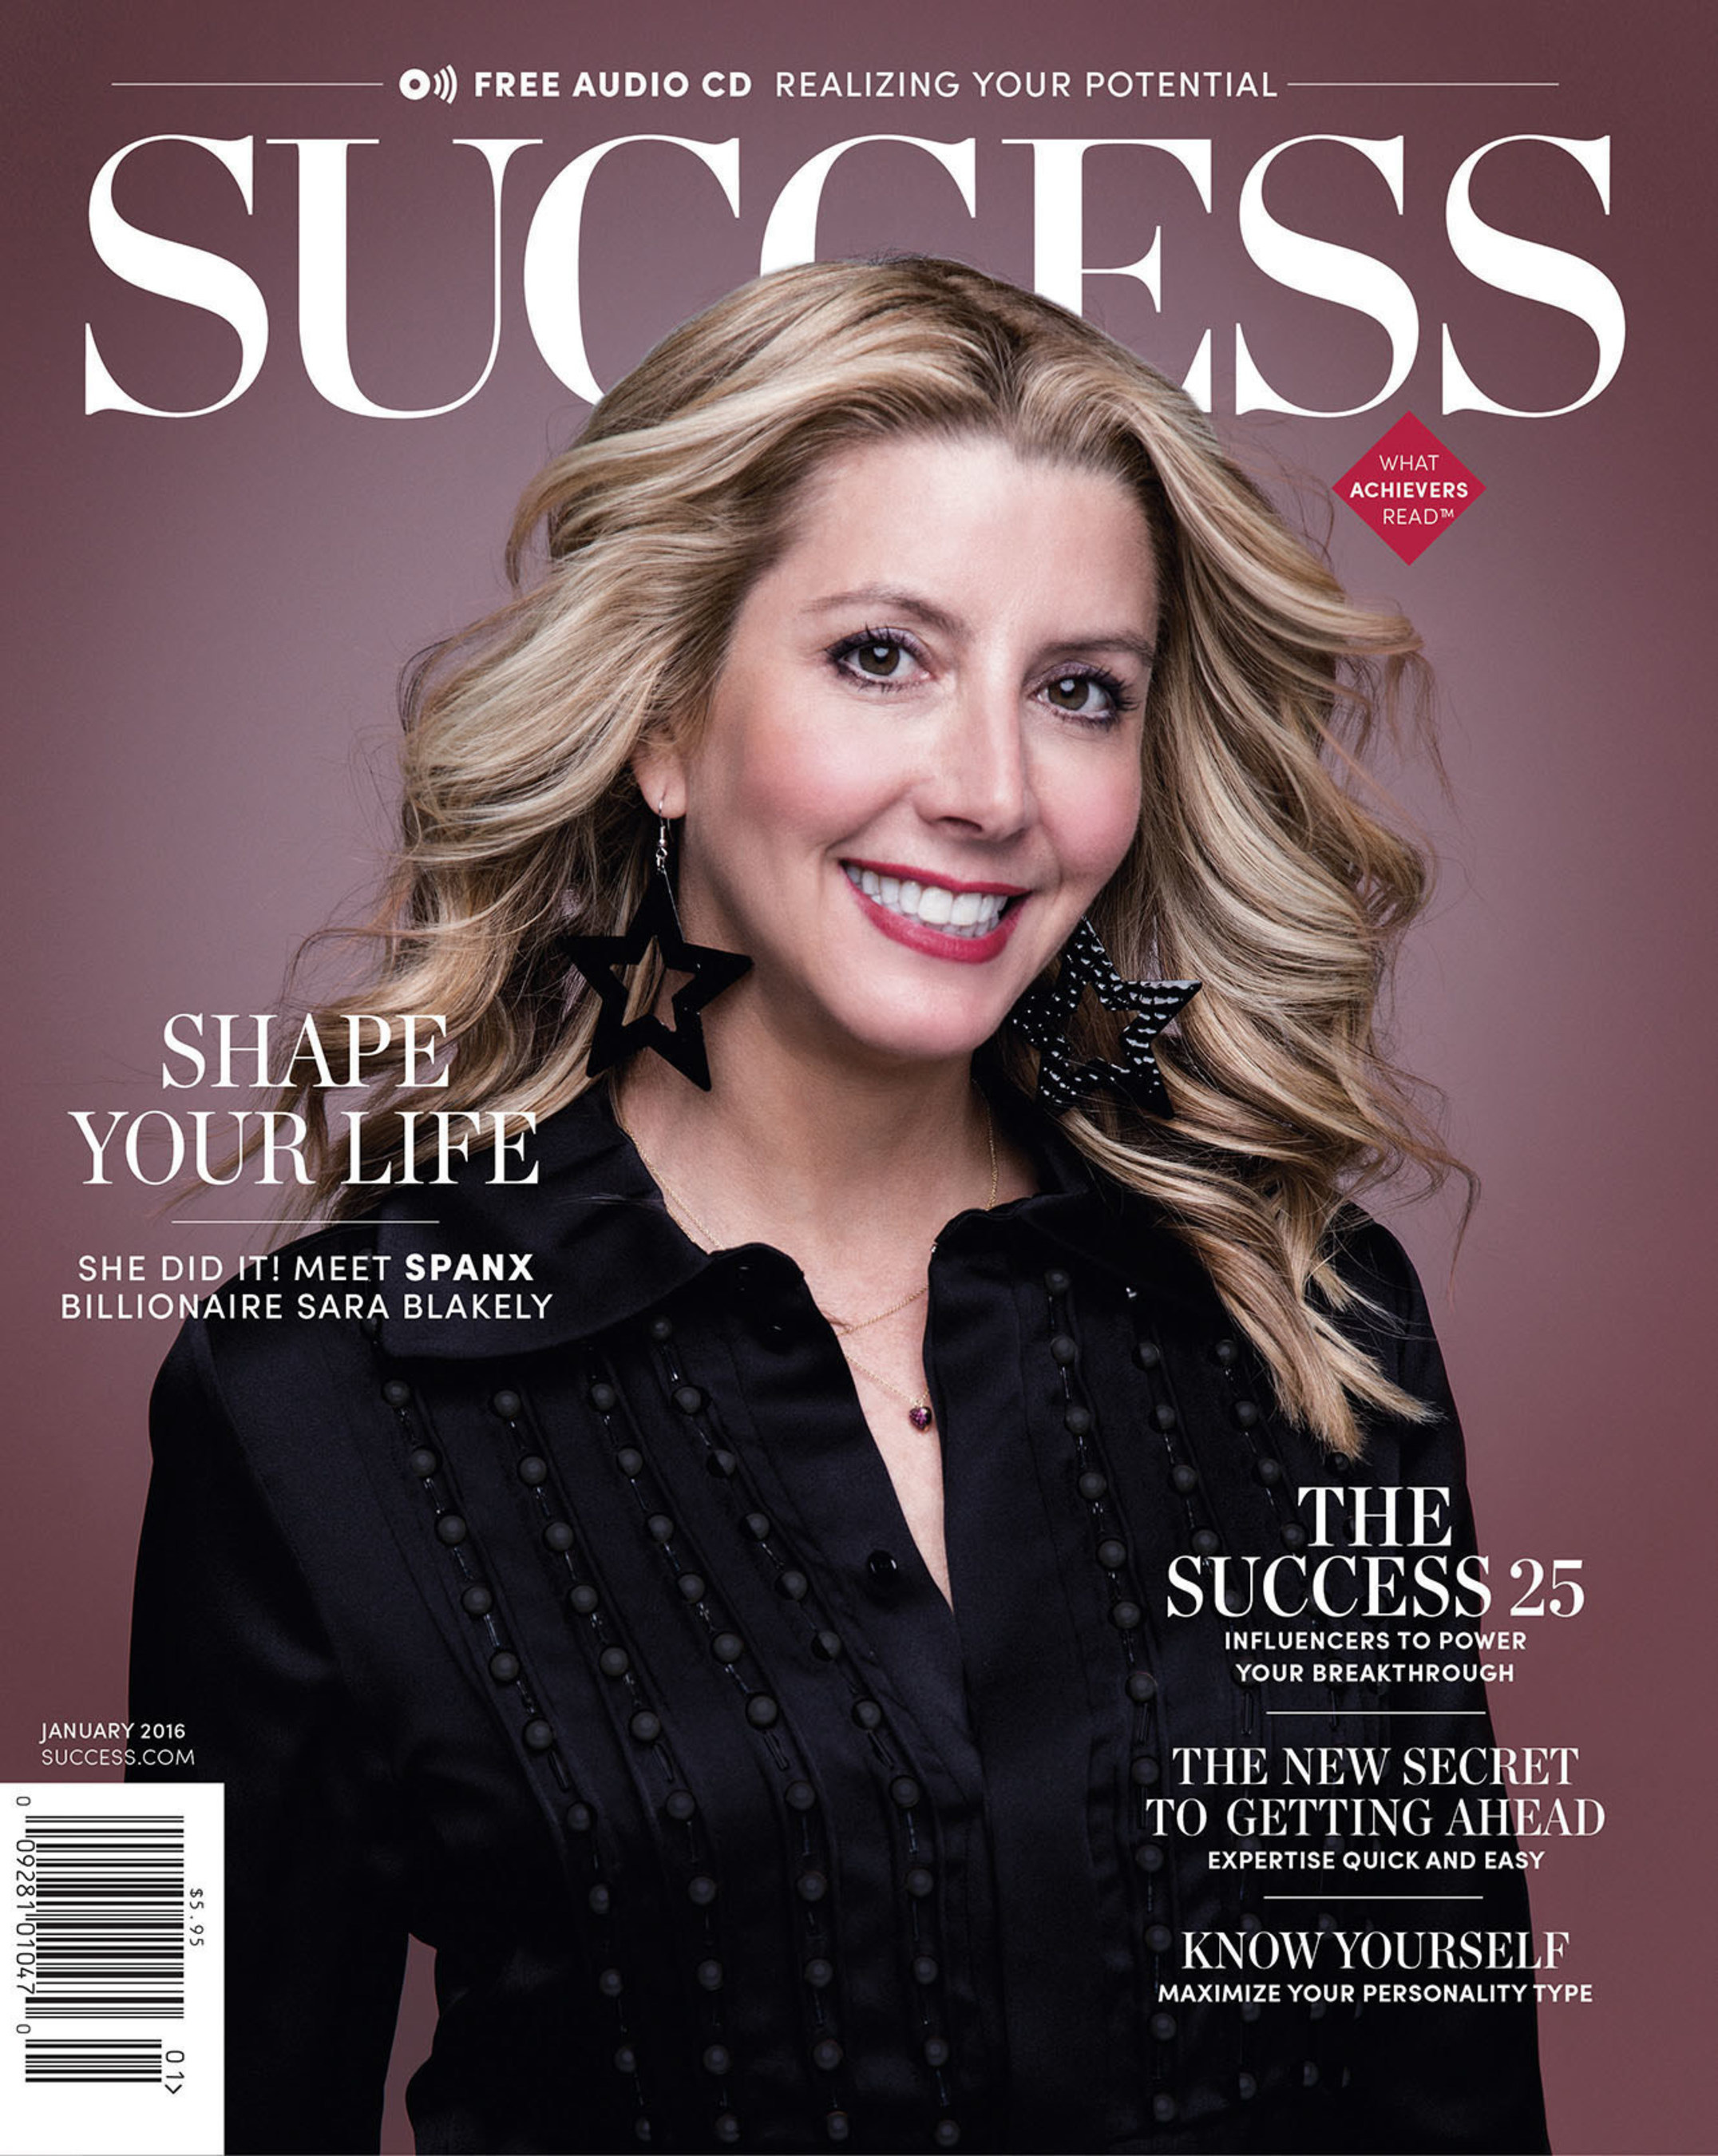 Spanx Founder Sara Blakely Shares the Secrets Behind Her Shapewear Empire  with SUCCESS